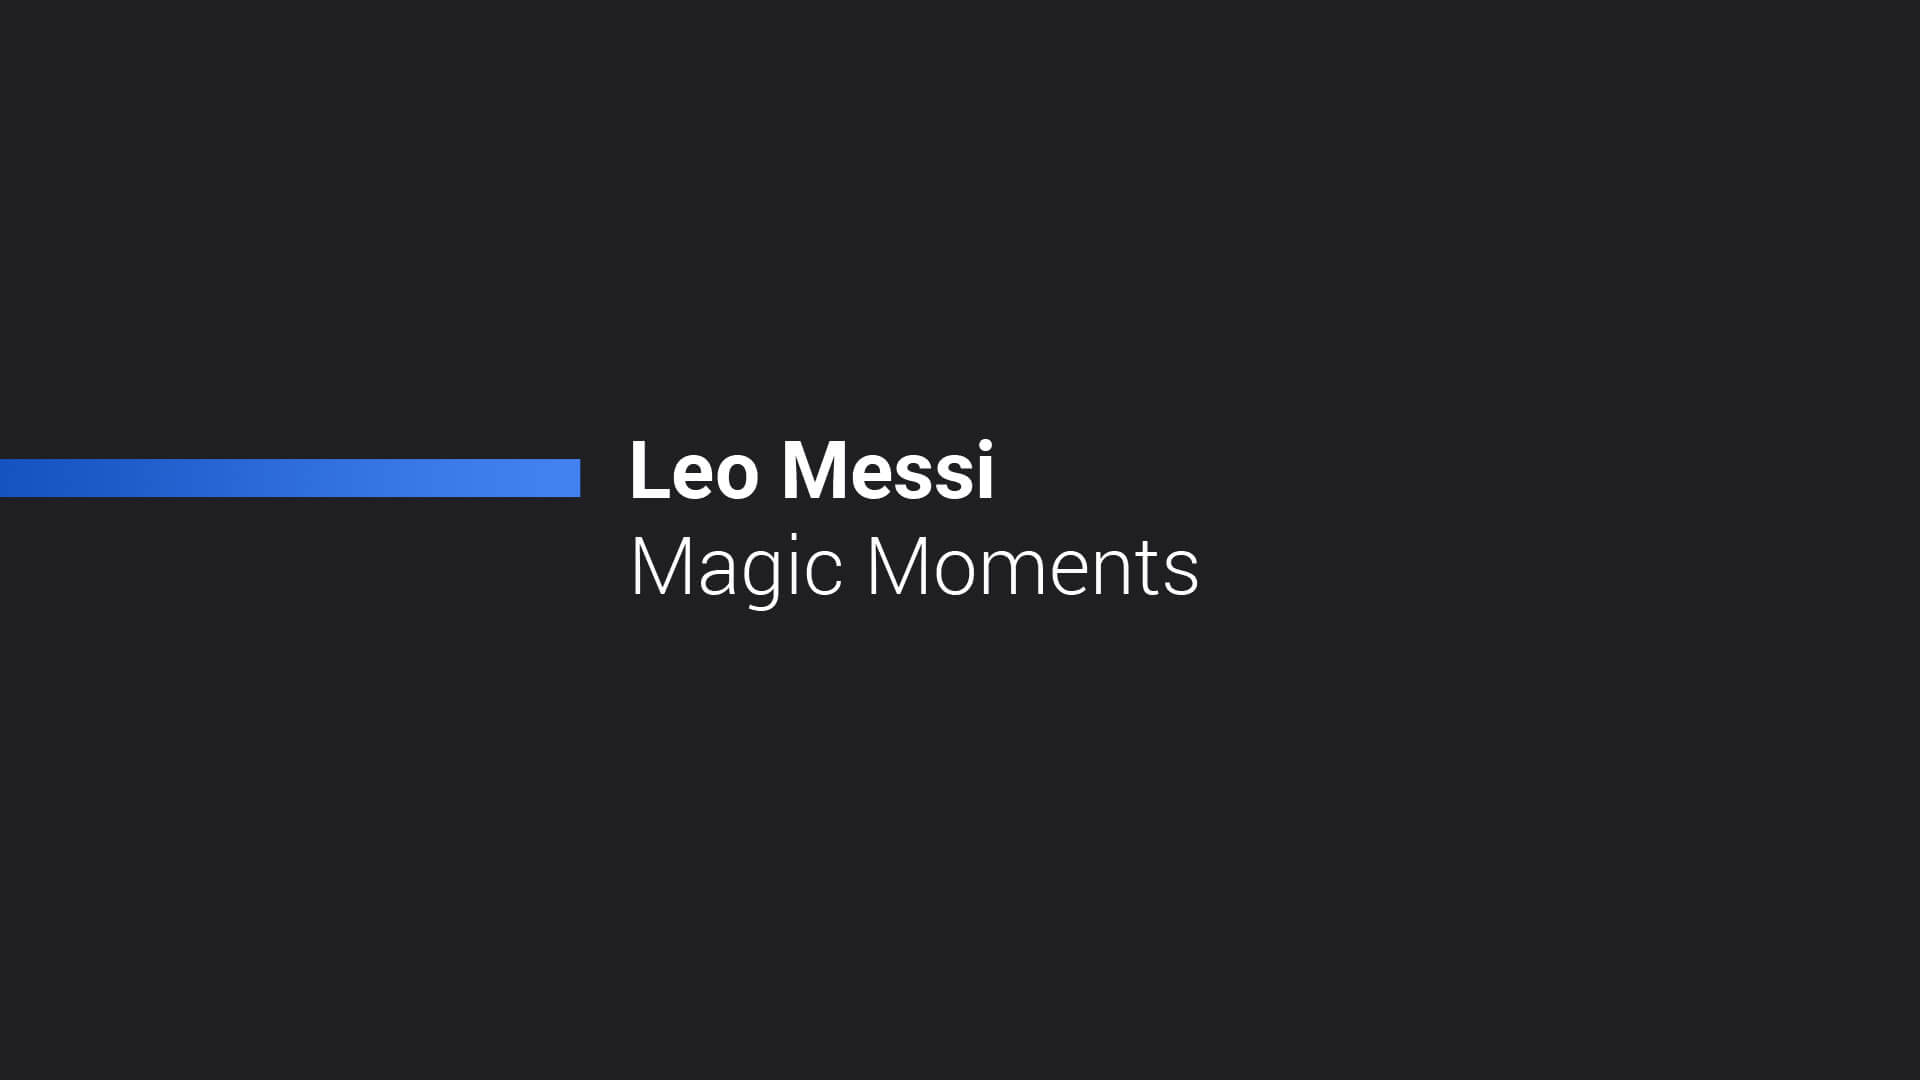 LEO MESSI MAGIC MOMENTS Campaign by ORCAM